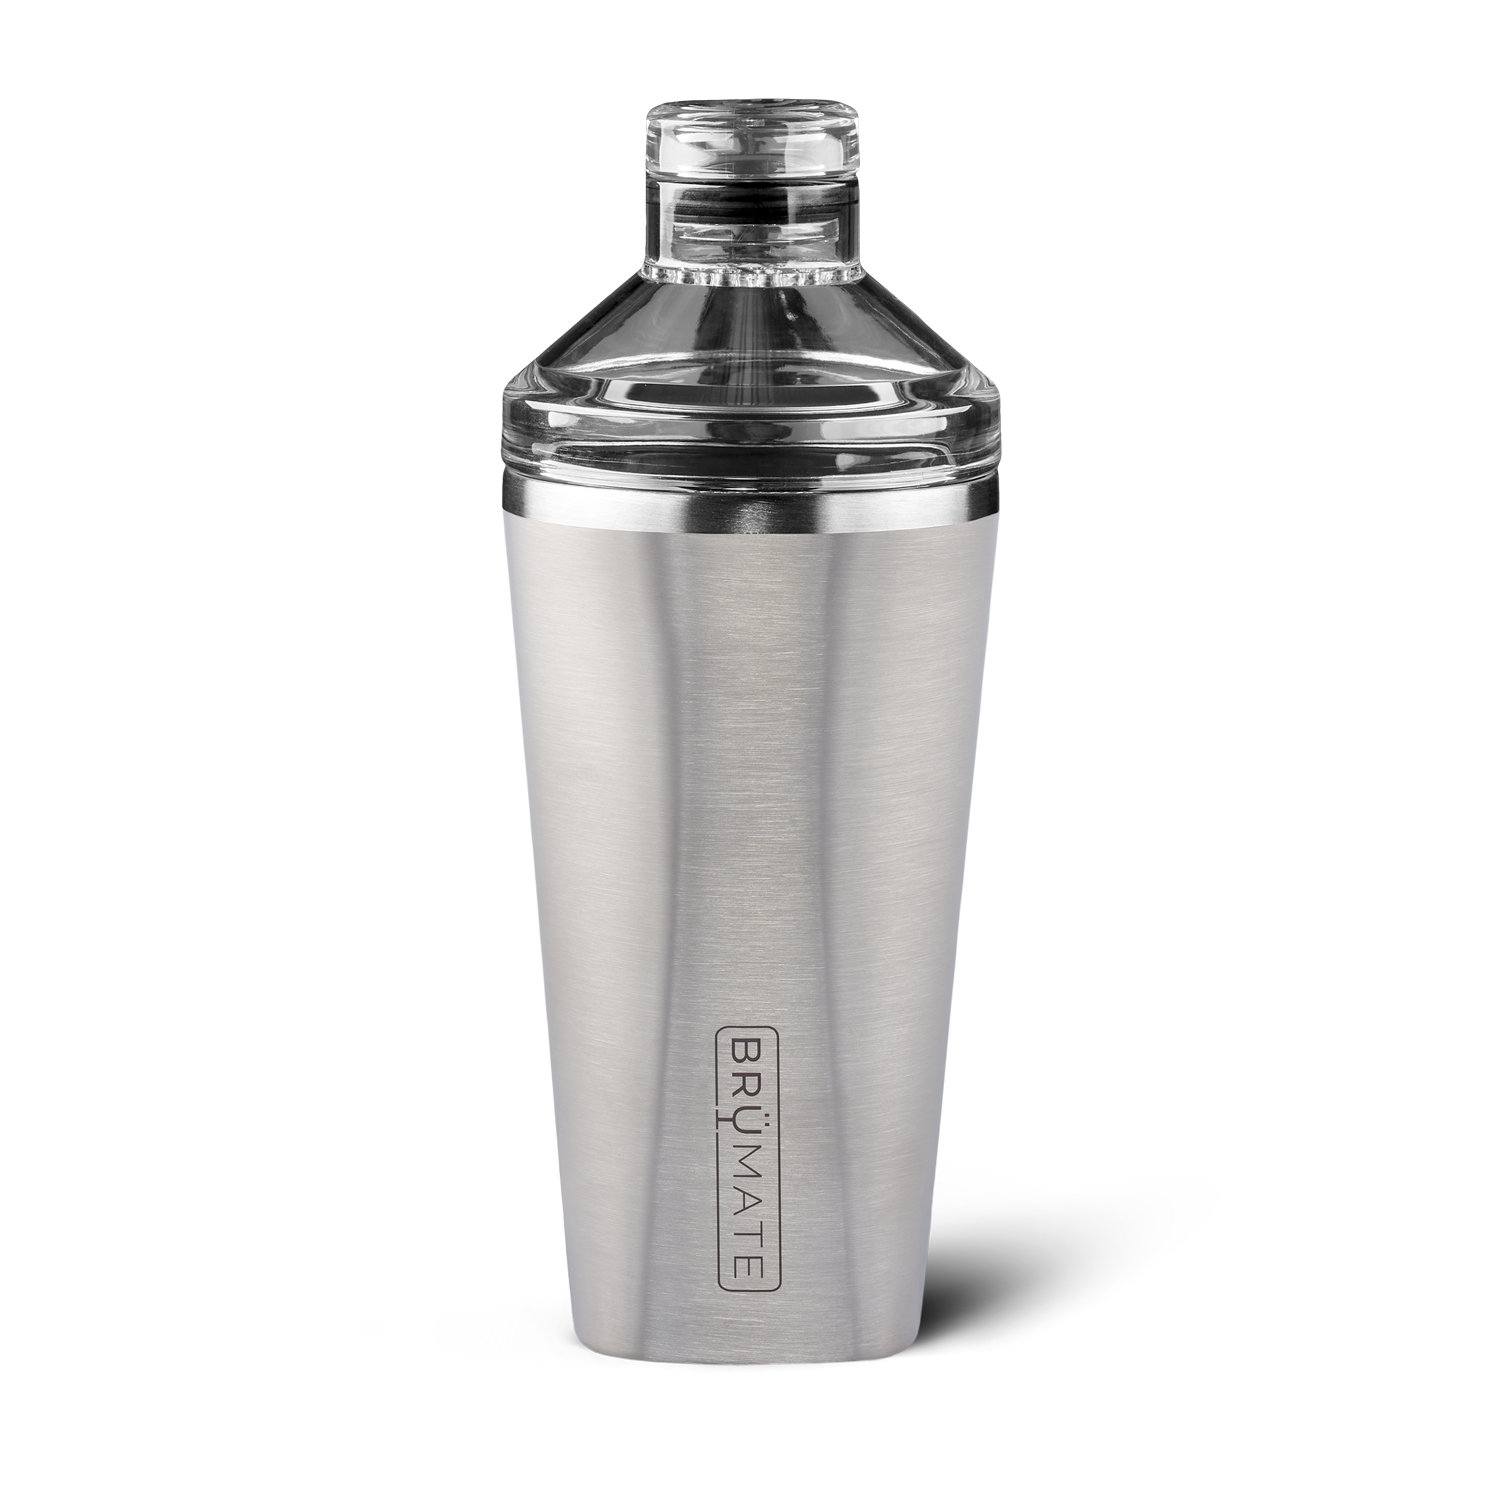 https://cdn.shopify.com/s/files/1/1114/2308/products/shaker-pint-stainless_6d0ae424-a5b9-4310-a61d-74f036641246_768x_crop_center@2x.progressive.png?v=1661451238